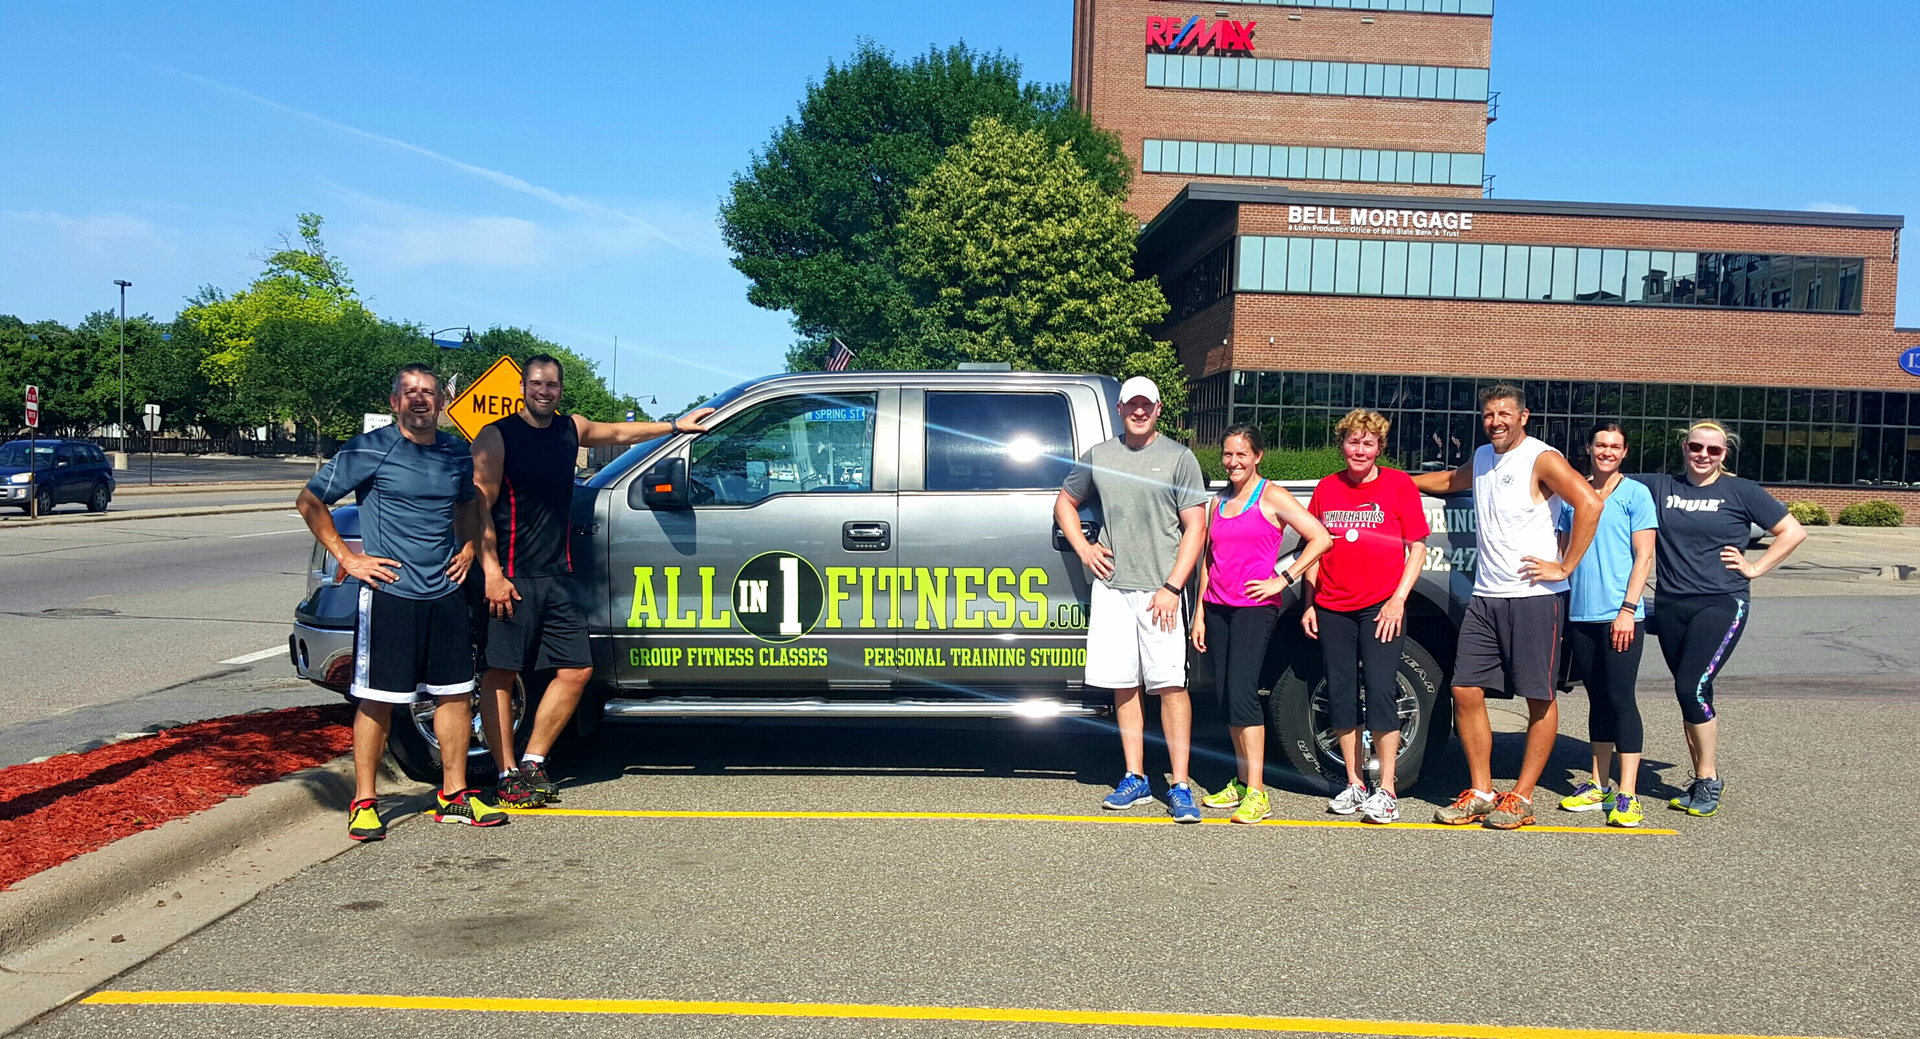 All In 1 Fitness